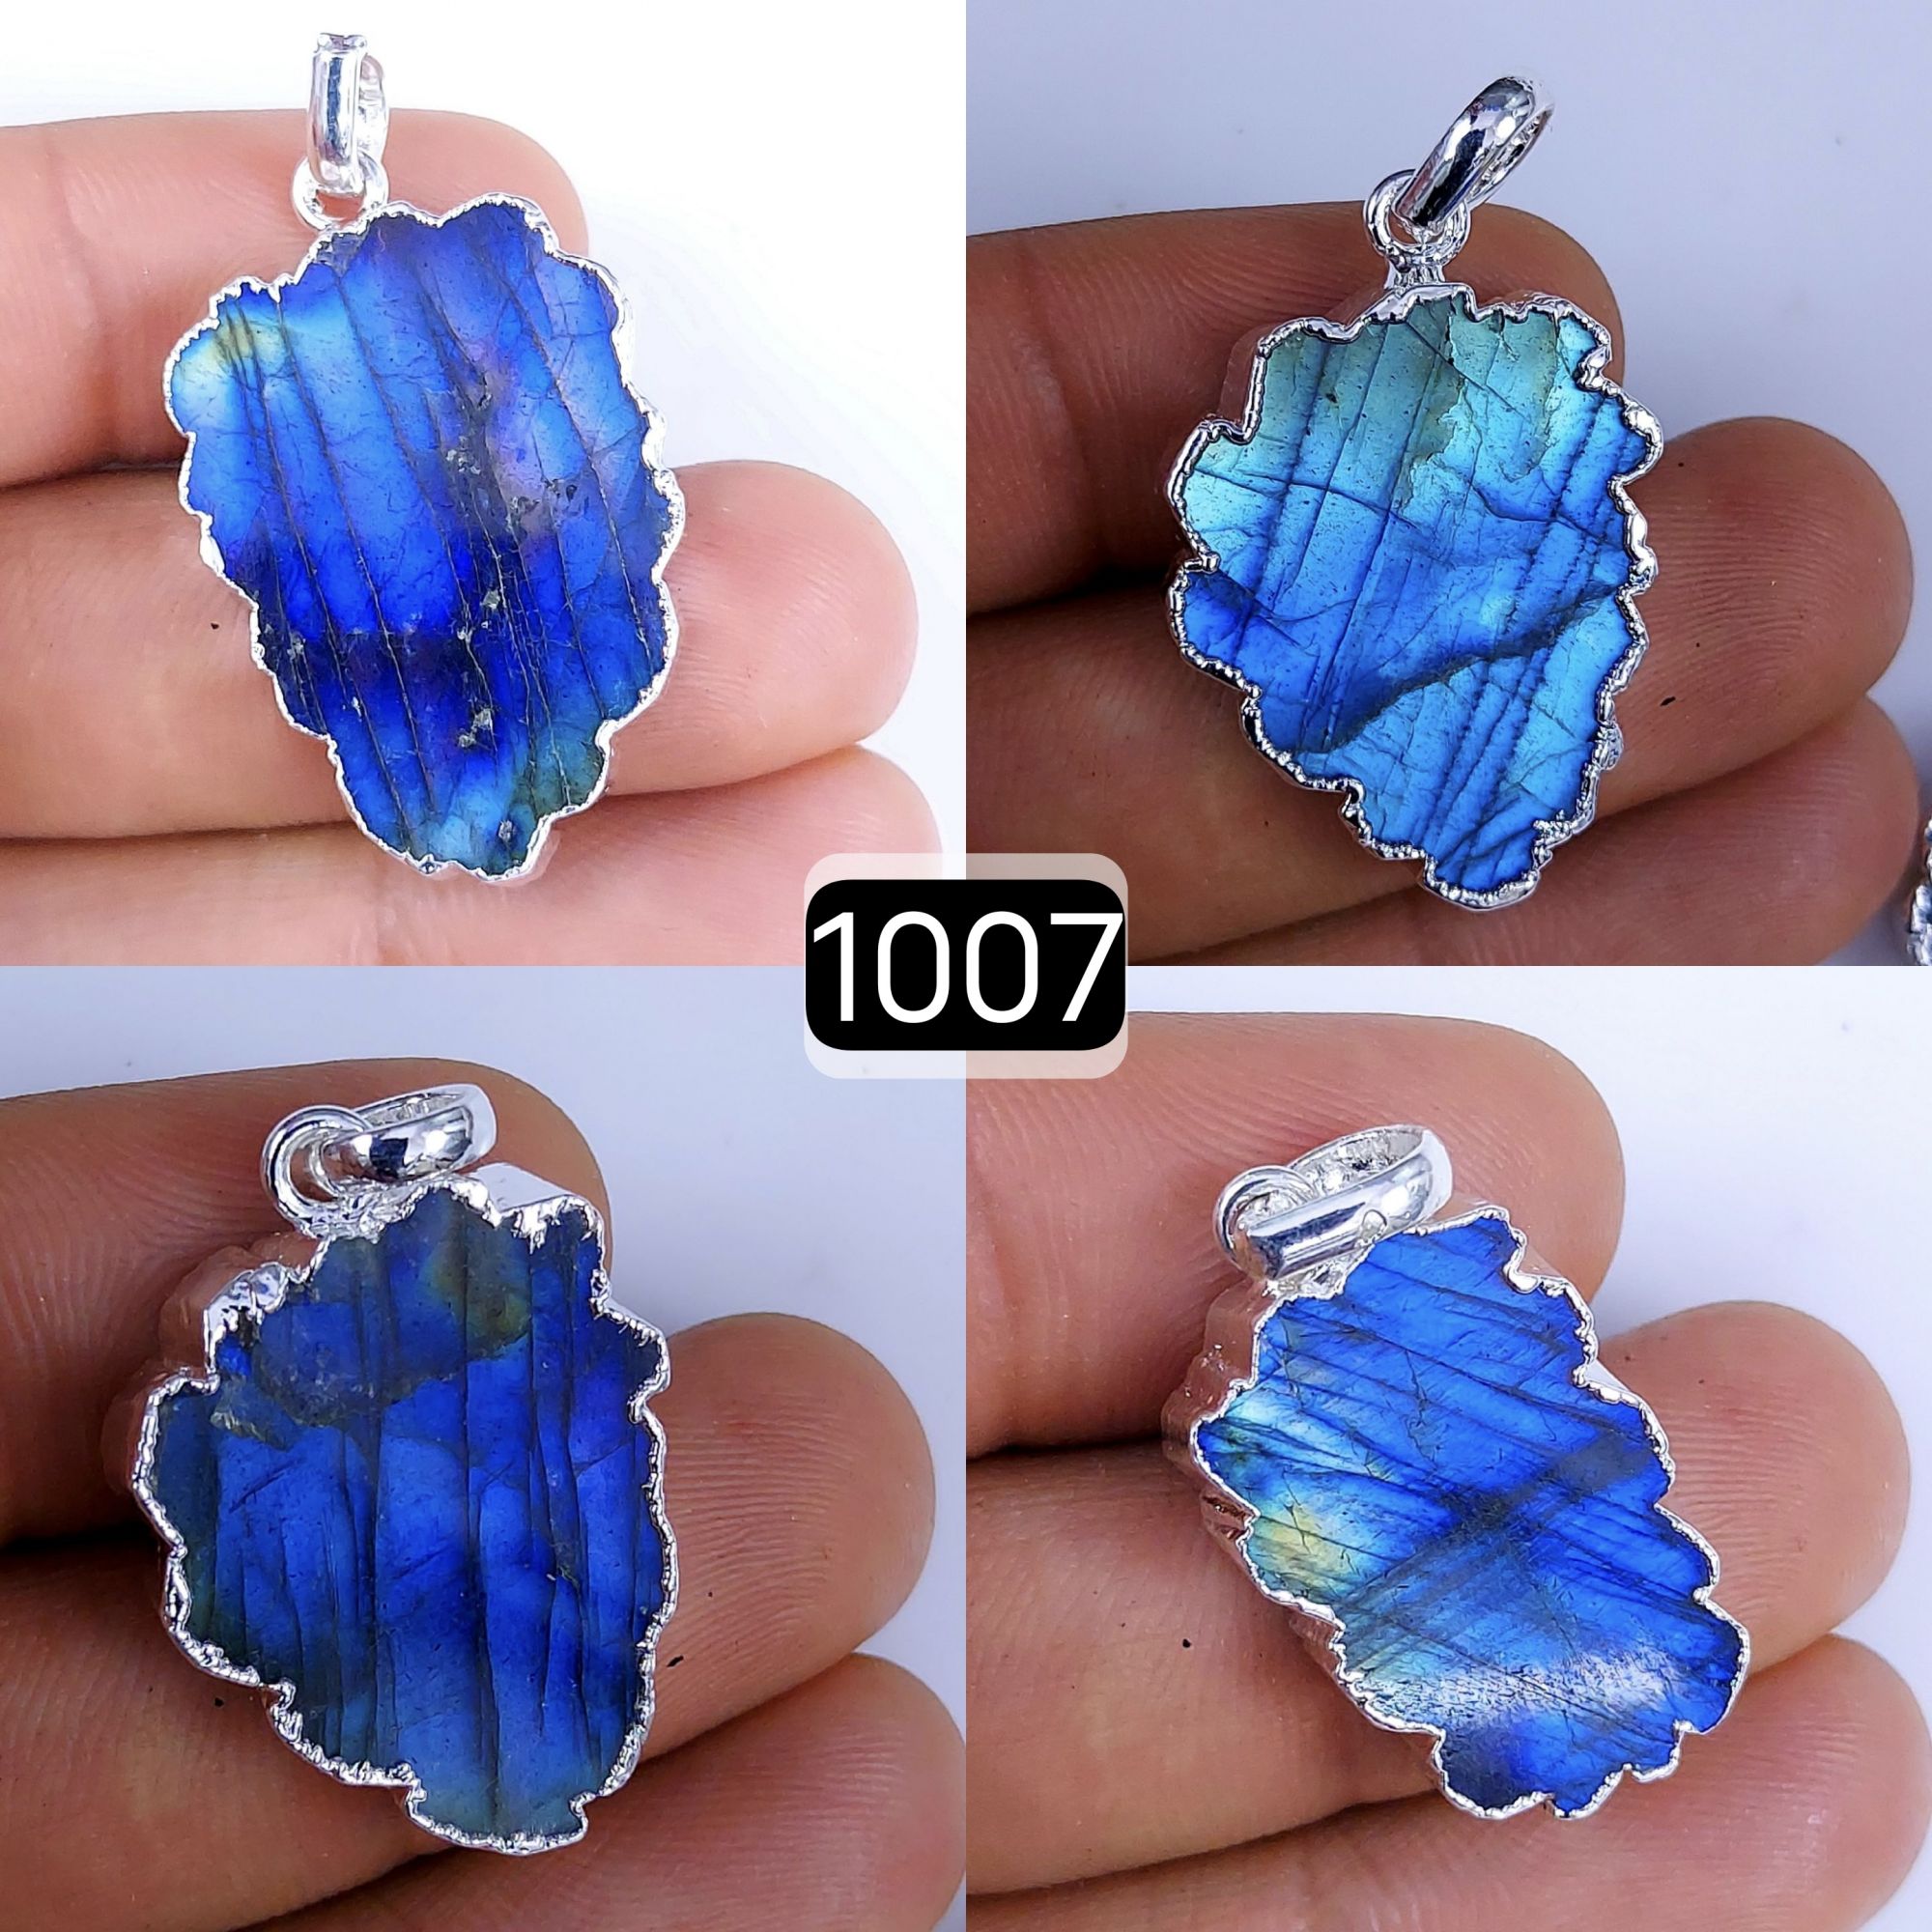 133Cts Natural Blue Labradorite Silver Electroplated Slice Pendant 32x18 22x12mm#1007